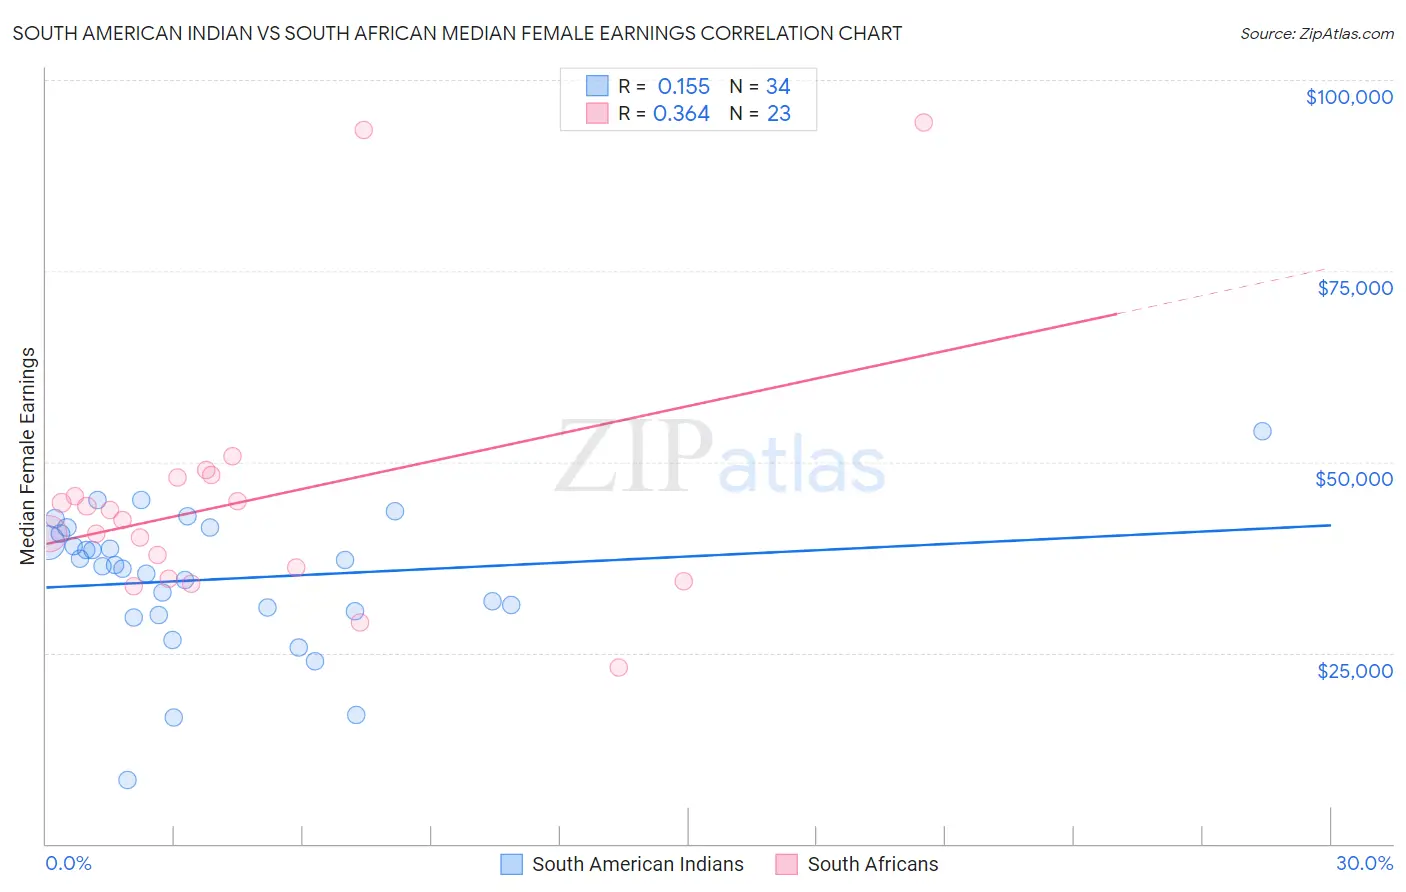 South American Indian vs South African Median Female Earnings